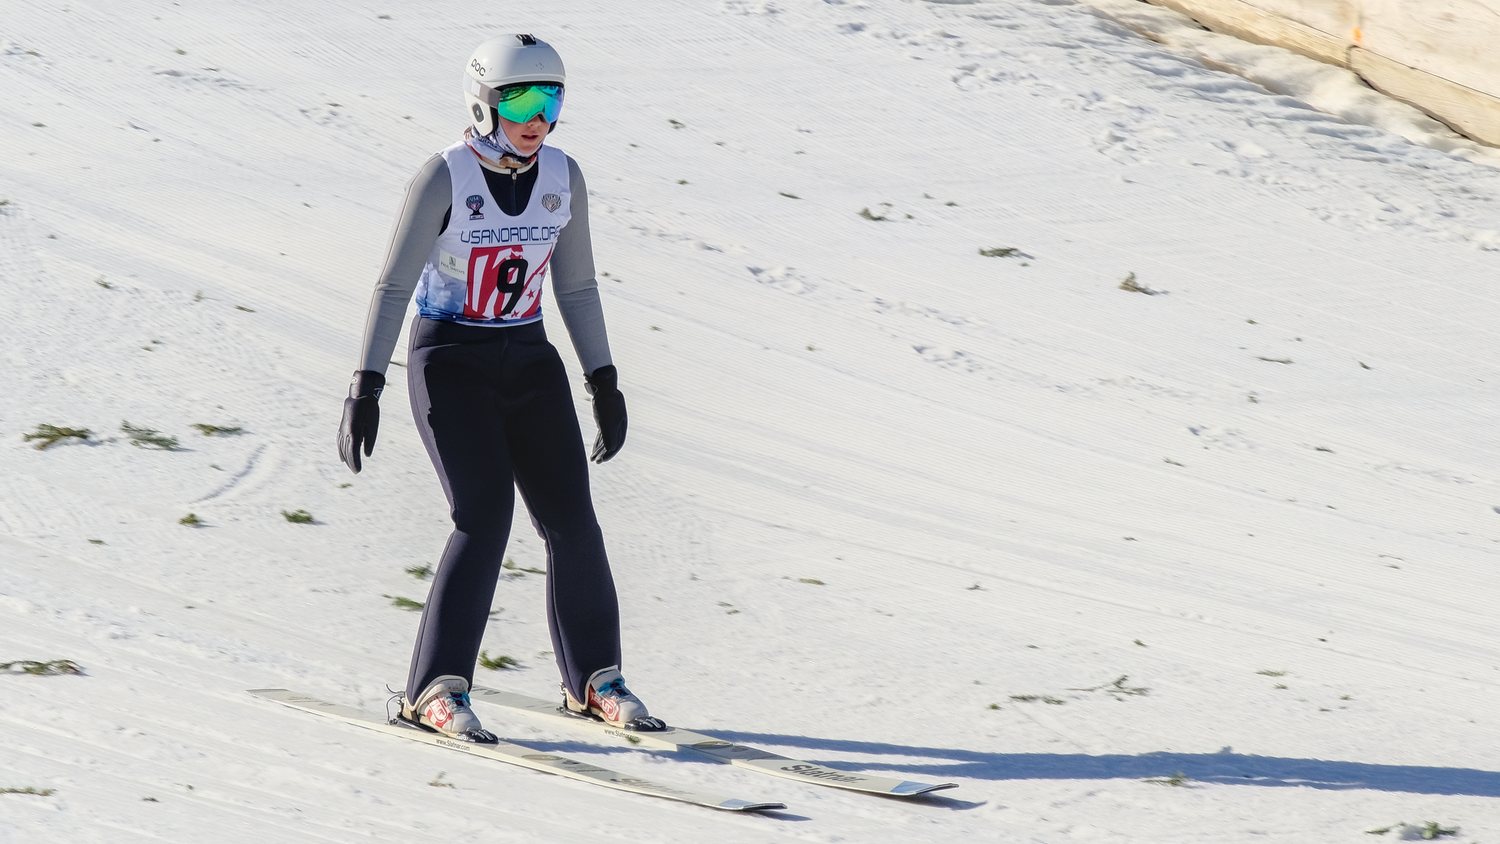 Emma Russell from Steamboat Springs Winter Sports Club at the 118th Annual Norge Ski Club Winter Tournament.